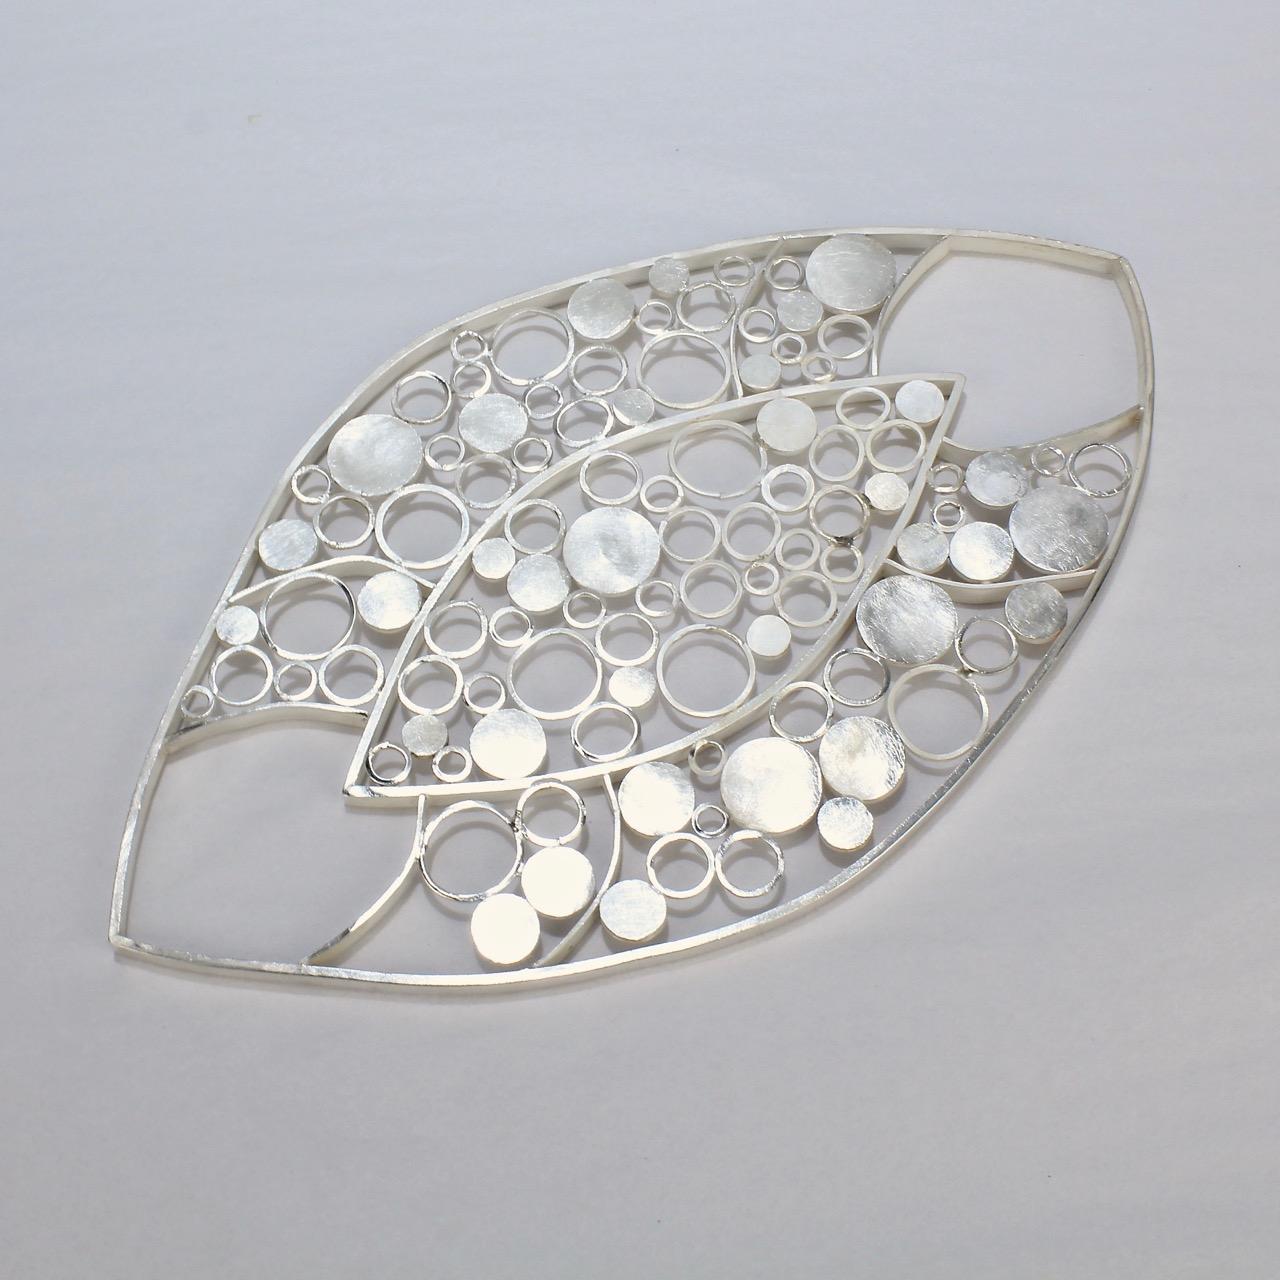 A whimsical, modernist sterling silver trivet. 

With a hand soldered ring and dot pattern in an asymmetrical oval form and with a brushed finish.

Perfect for a wine bottle or serving bowl!

The reverse is stamped Sterling and with the artist's